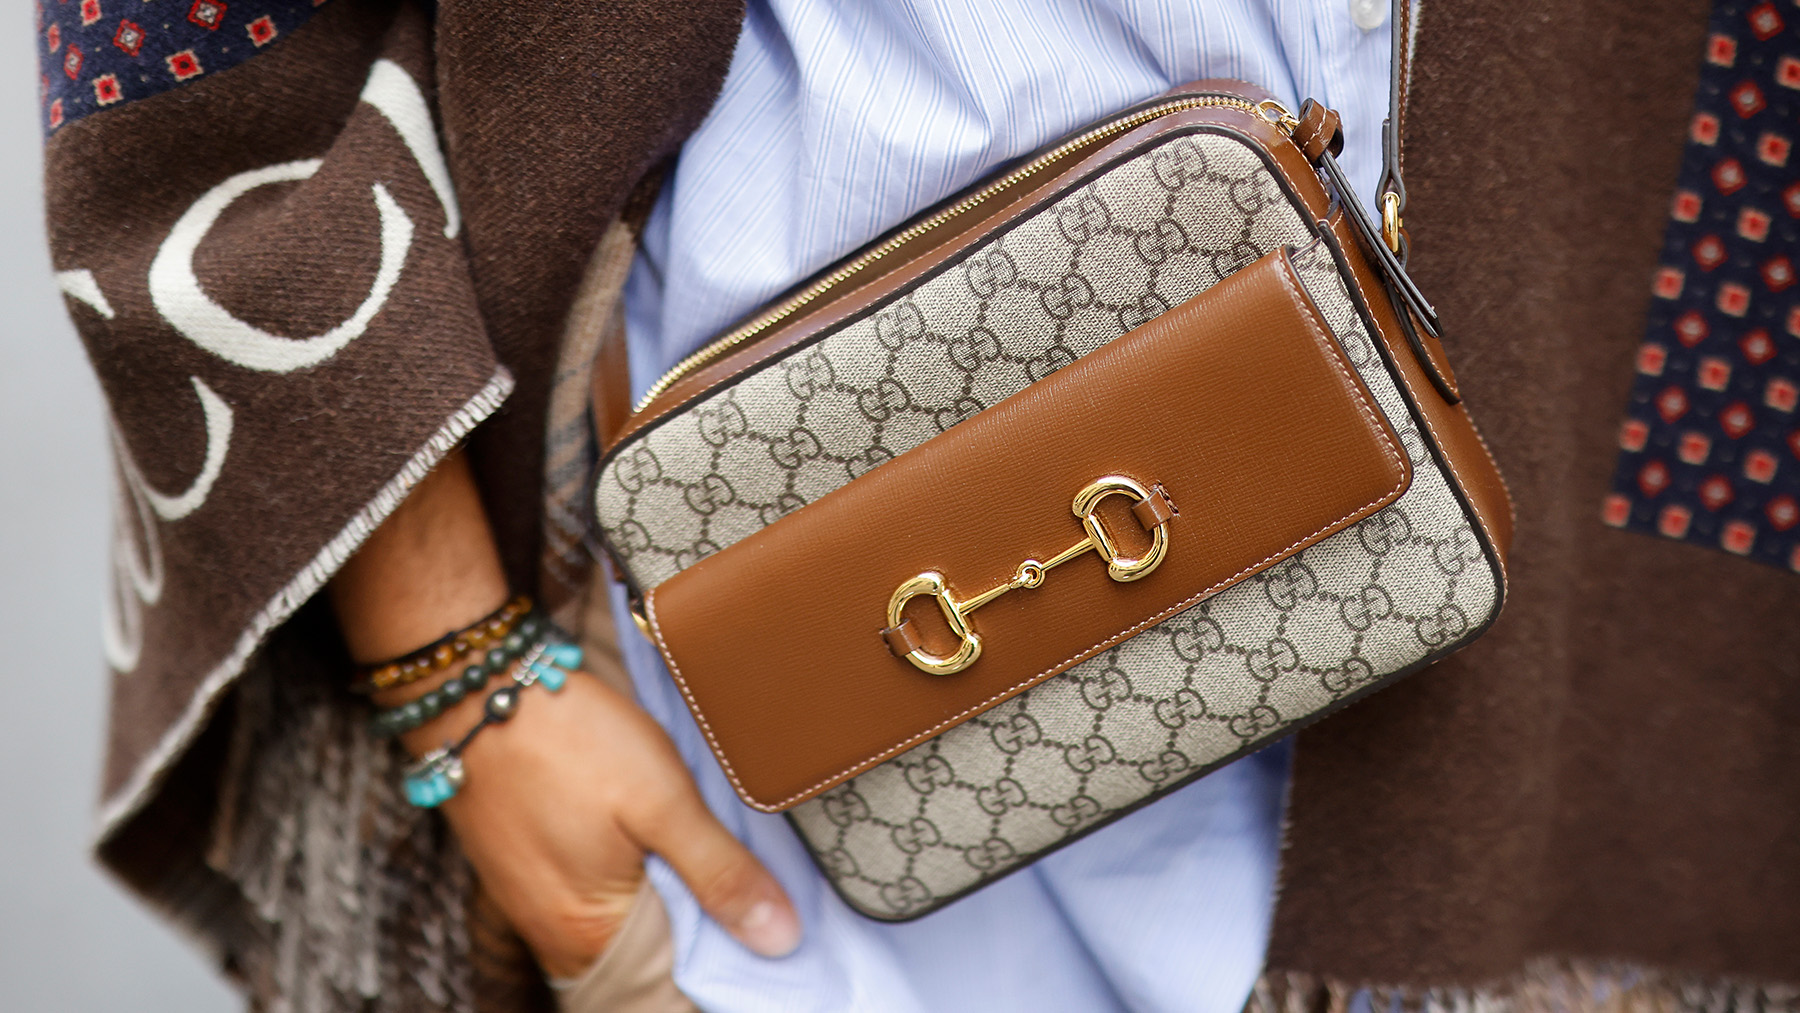 Luxury Resale Is Booming, But Some Luxury Brands Fear Cannibalization